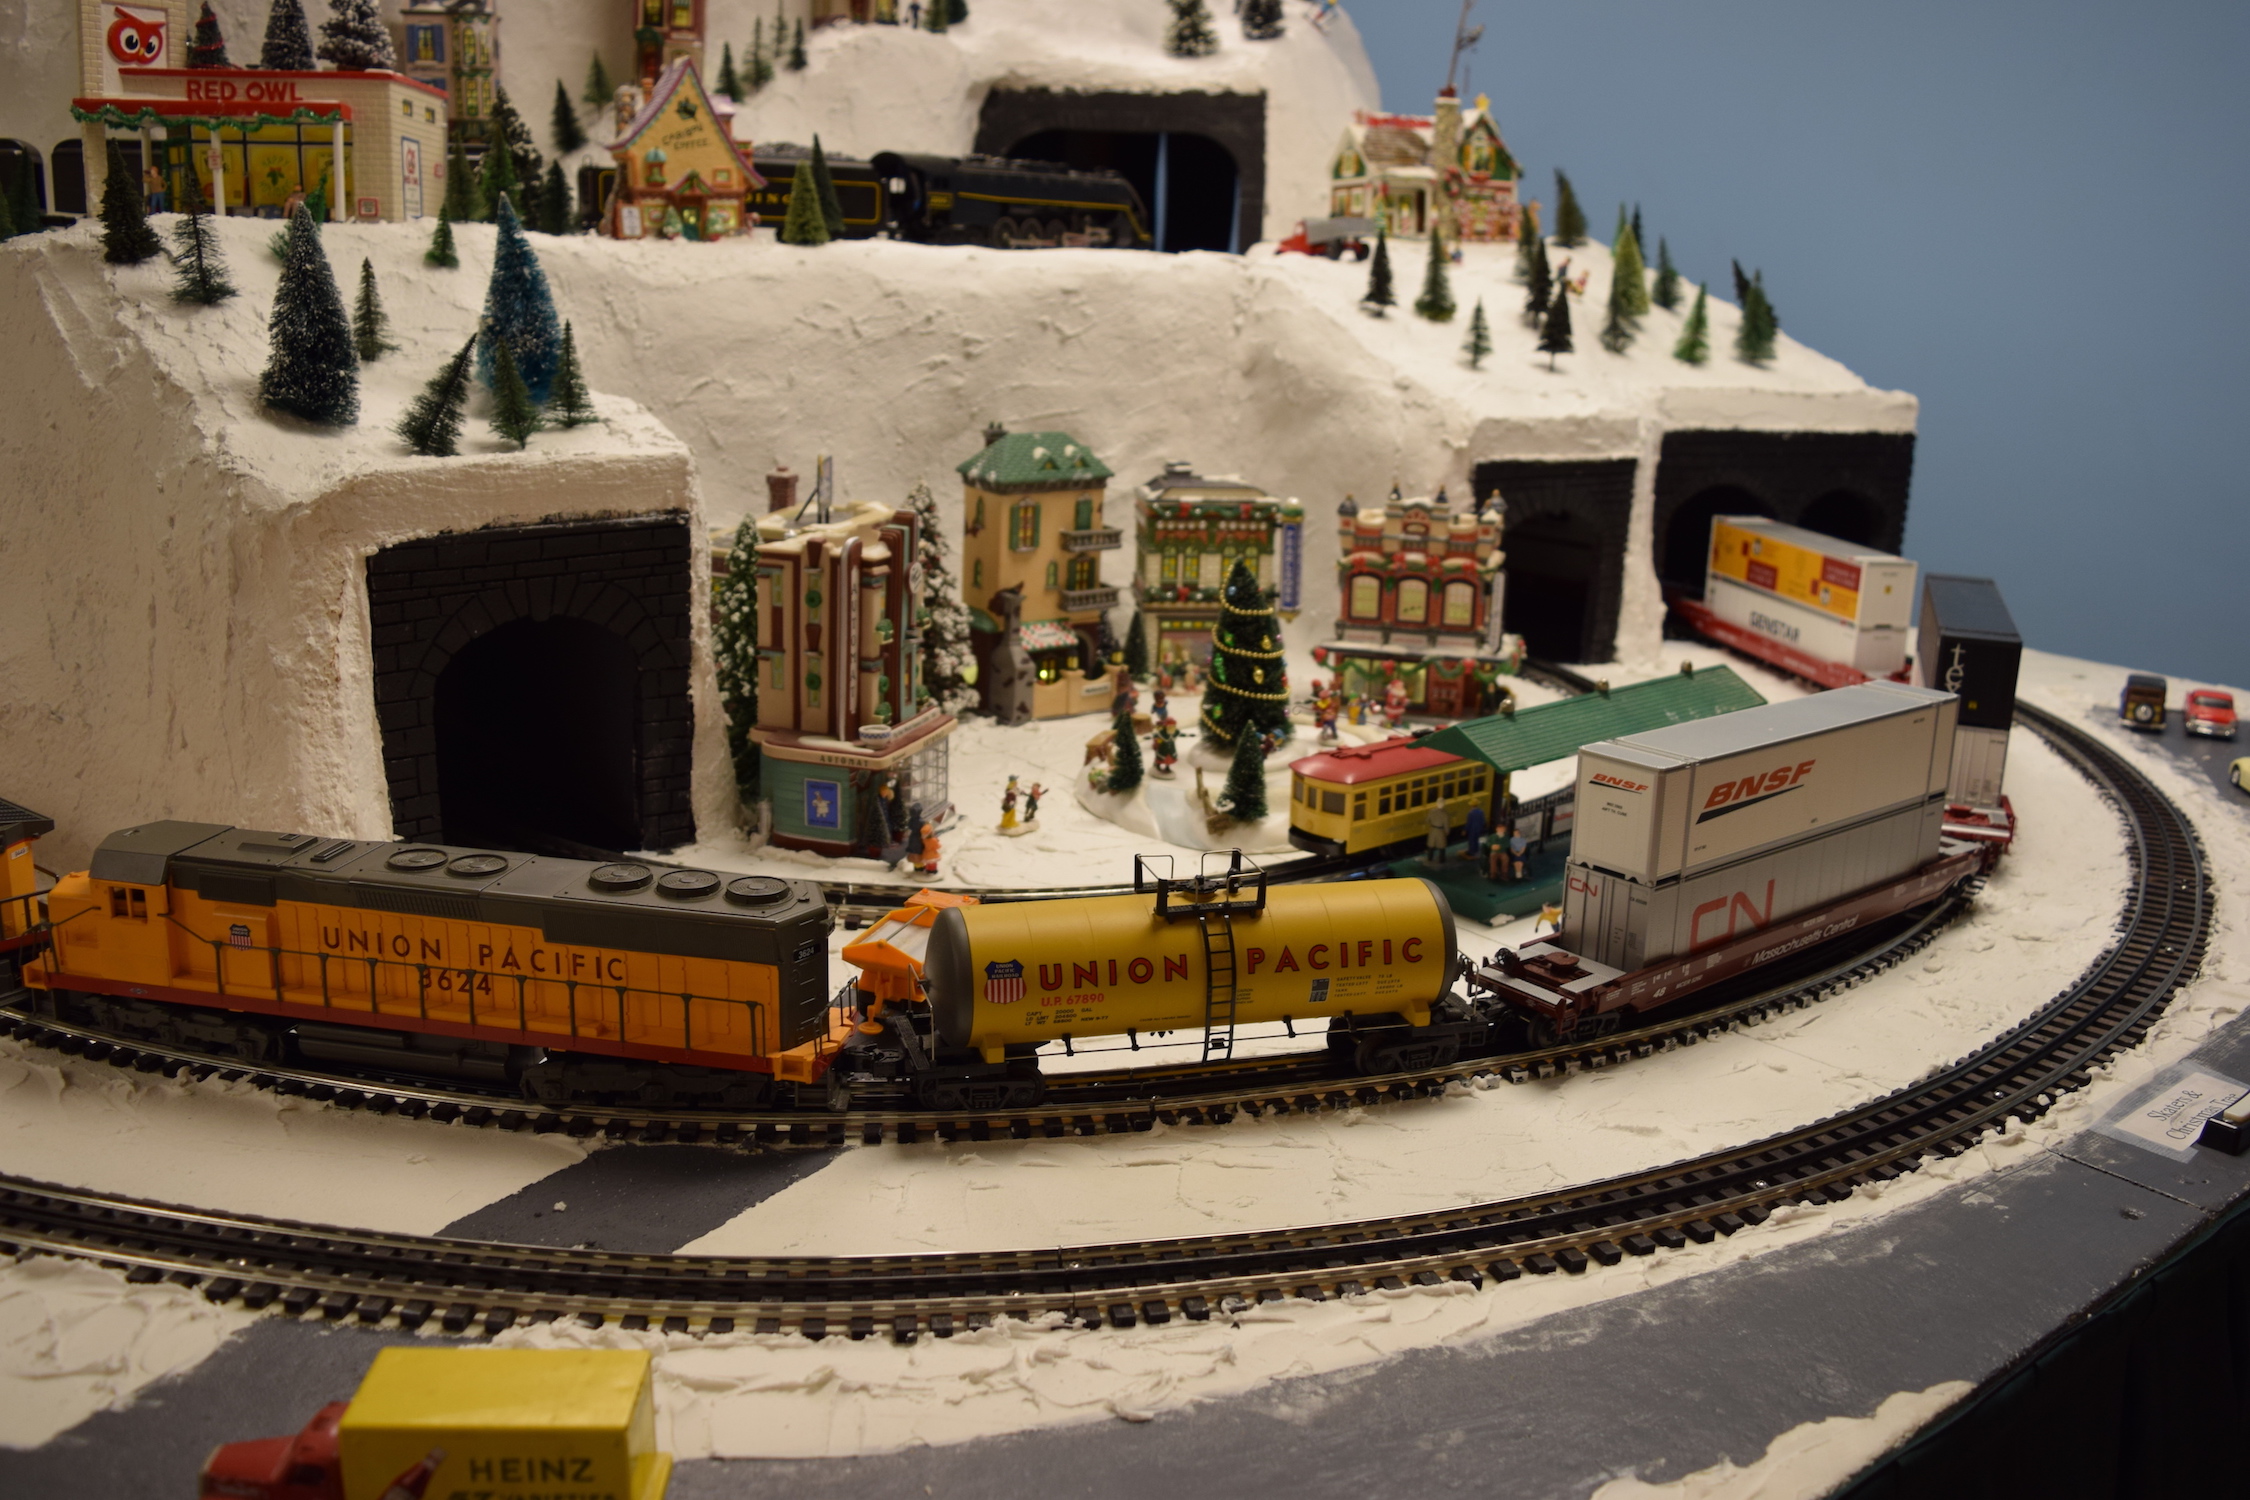 A freight train coming around the bend - Christmas at the Roundhouse" model train display.